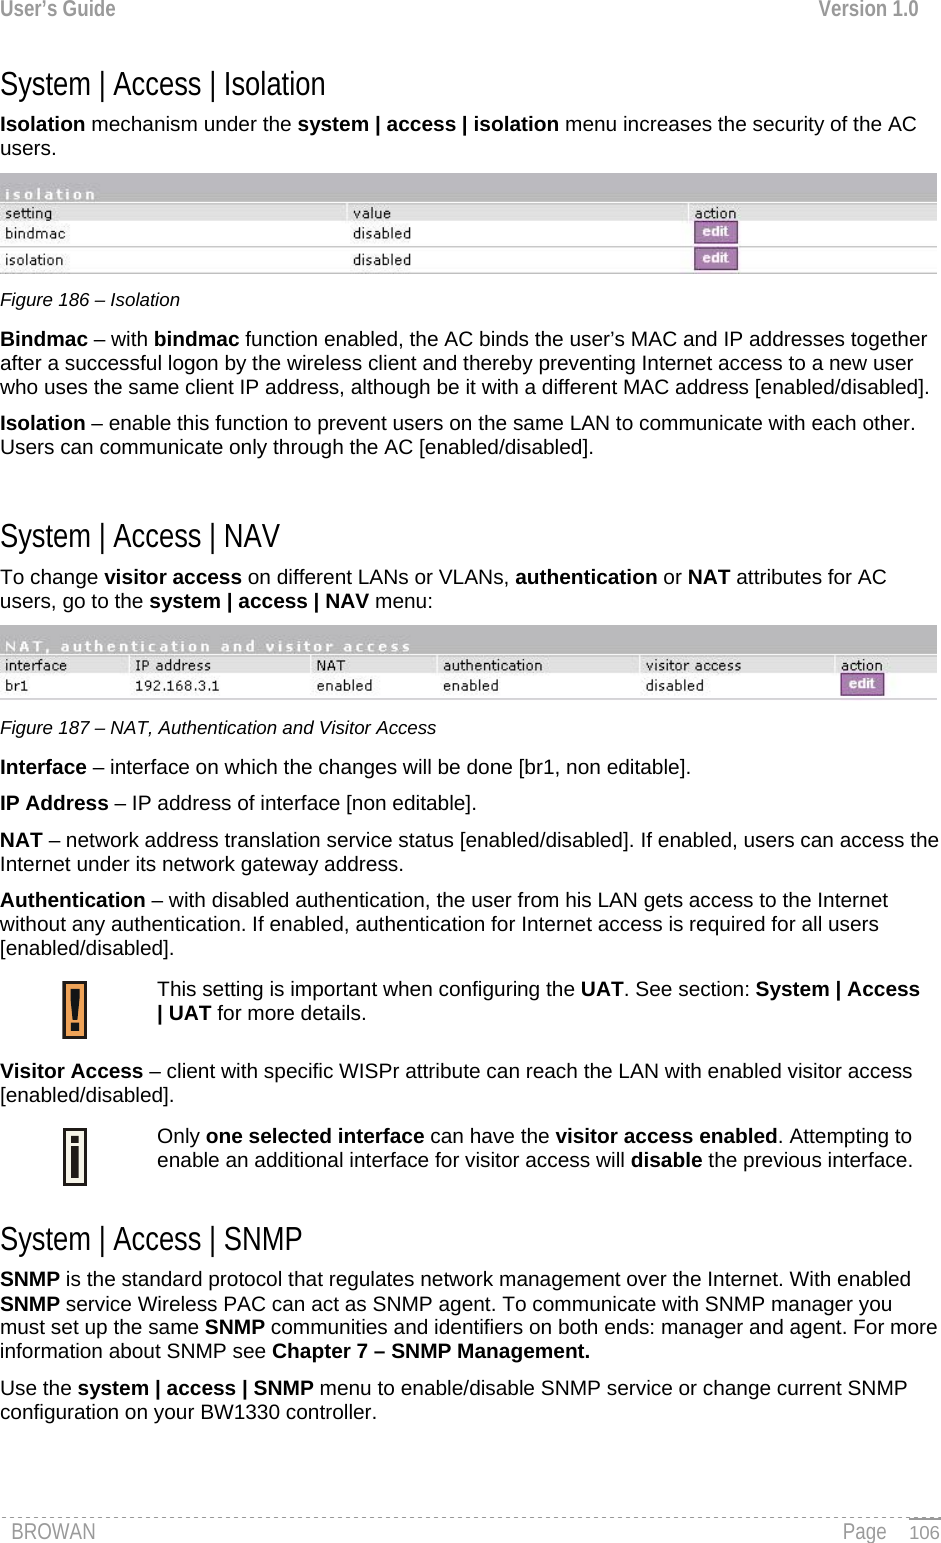 User’s Guide  Version 1.0  System | Access | Isolation  Isolation mechanism under the system | access | isolation menu increases the security of the AC users.  Figure 186 – Isolation Bindmac – with bindmac function enabled, the AC binds the user’s MAC and IP addresses together after a successful logon by the wireless client and thereby preventing Internet access to a new user who uses the same client IP address, although be it with a different MAC address [enabled/disabled]. Isolation – enable this function to prevent users on the same LAN to communicate with each other. Users can communicate only through the AC [enabled/disabled].  System | Access | NAV  To change visitor access on different LANs or VLANs, authentication or NAT attributes for AC users, go to the system | access | NAV menu:  Figure 187 – NAT, Authentication and Visitor Access Interface – interface on which the changes will be done [br1, non editable]. IP Address – IP address of interface [non editable]. NAT – network address translation service status [enabled/disabled]. If enabled, users can access the Internet under its network gateway address. Authentication – with disabled authentication, the user from his LAN gets access to the Internet without any authentication. If enabled, authentication for Internet access is required for all users [enabled/disabled]. This setting is important when configuring the UAT. See section: System | Access | UAT for more details.  Visitor Access – client with specific WISPr attribute can reach the LAN with enabled visitor access [enabled/disabled]. Only one selected interface can have the visitor access enabled. Attempting to enable an additional interface for visitor access will disable the previous interface.  System | Access | SNMP SNMP is the standard protocol that regulates network management over the Internet. With enabled SNMP service Wireless PAC can act as SNMP agent. To communicate with SNMP manager you must set up the same SNMP communities and identifiers on both ends: manager and agent. For more information about SNMP see Chapter 7 – SNMP Management. Use the system | access | SNMP menu to enable/disable SNMP service or change current SNMP configuration on your BW1330 controller. BROWAN                                                                                                                                               Page   106